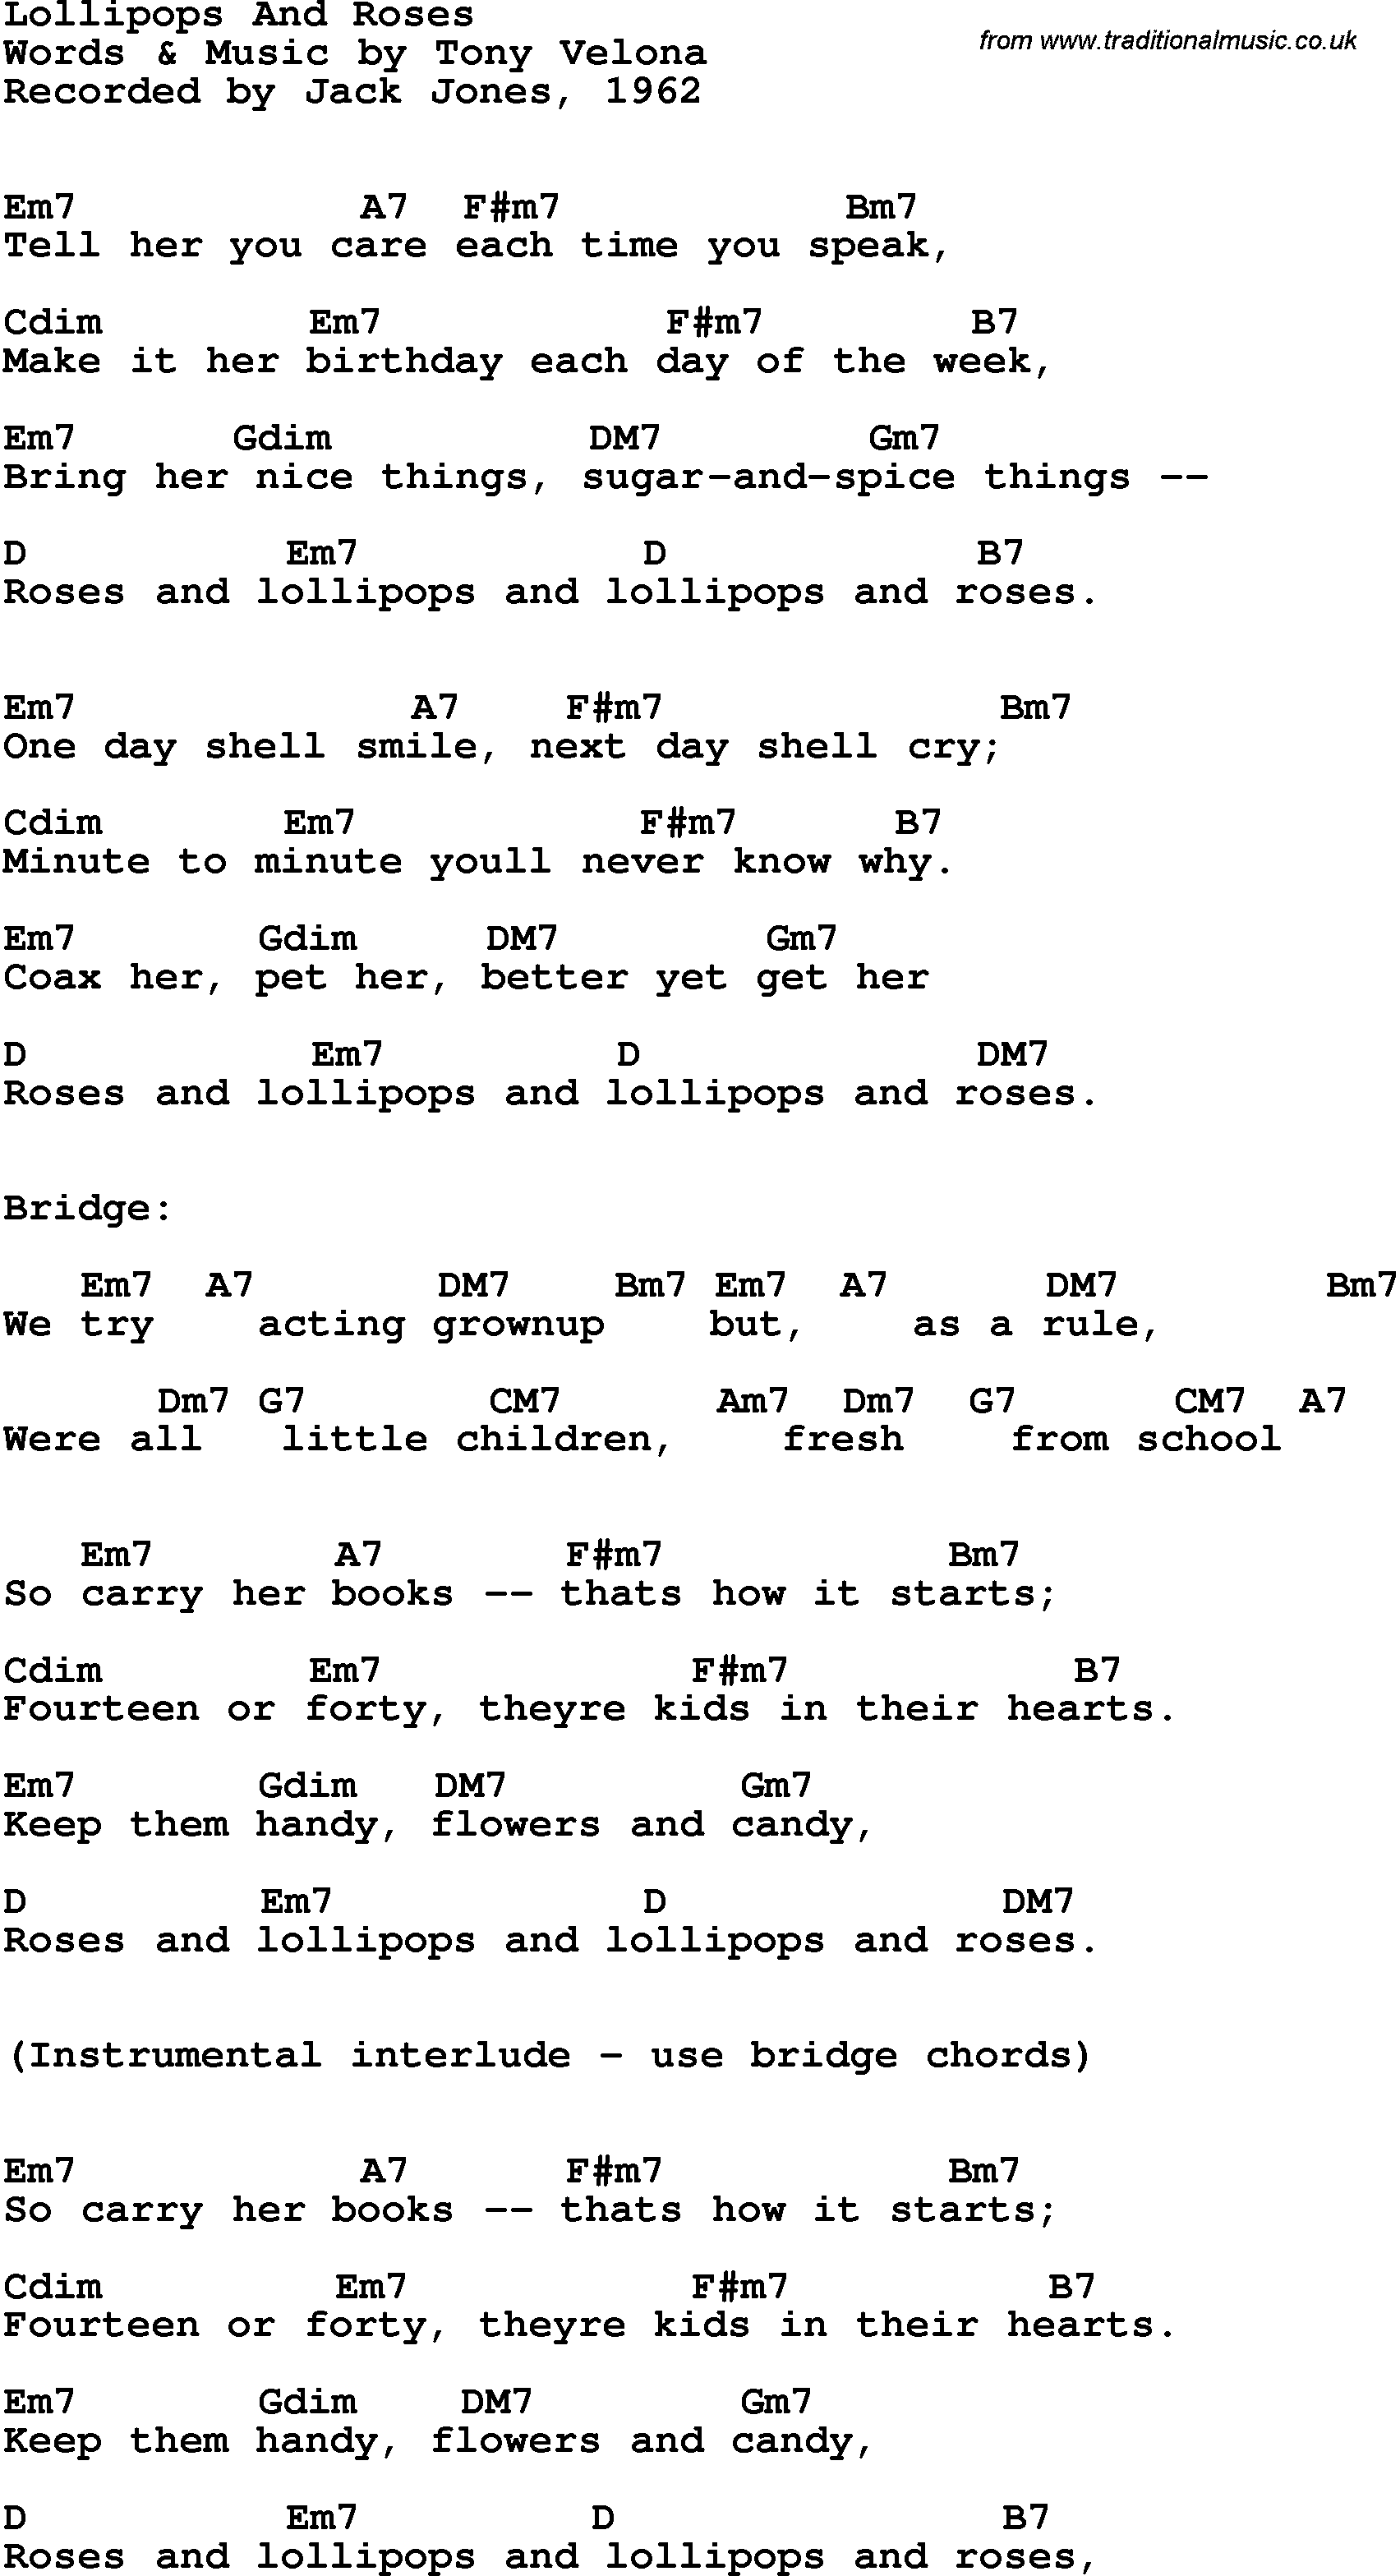 Song Lyrics with guitar chords for Lollipops And Roses - Jack Jones, 1962